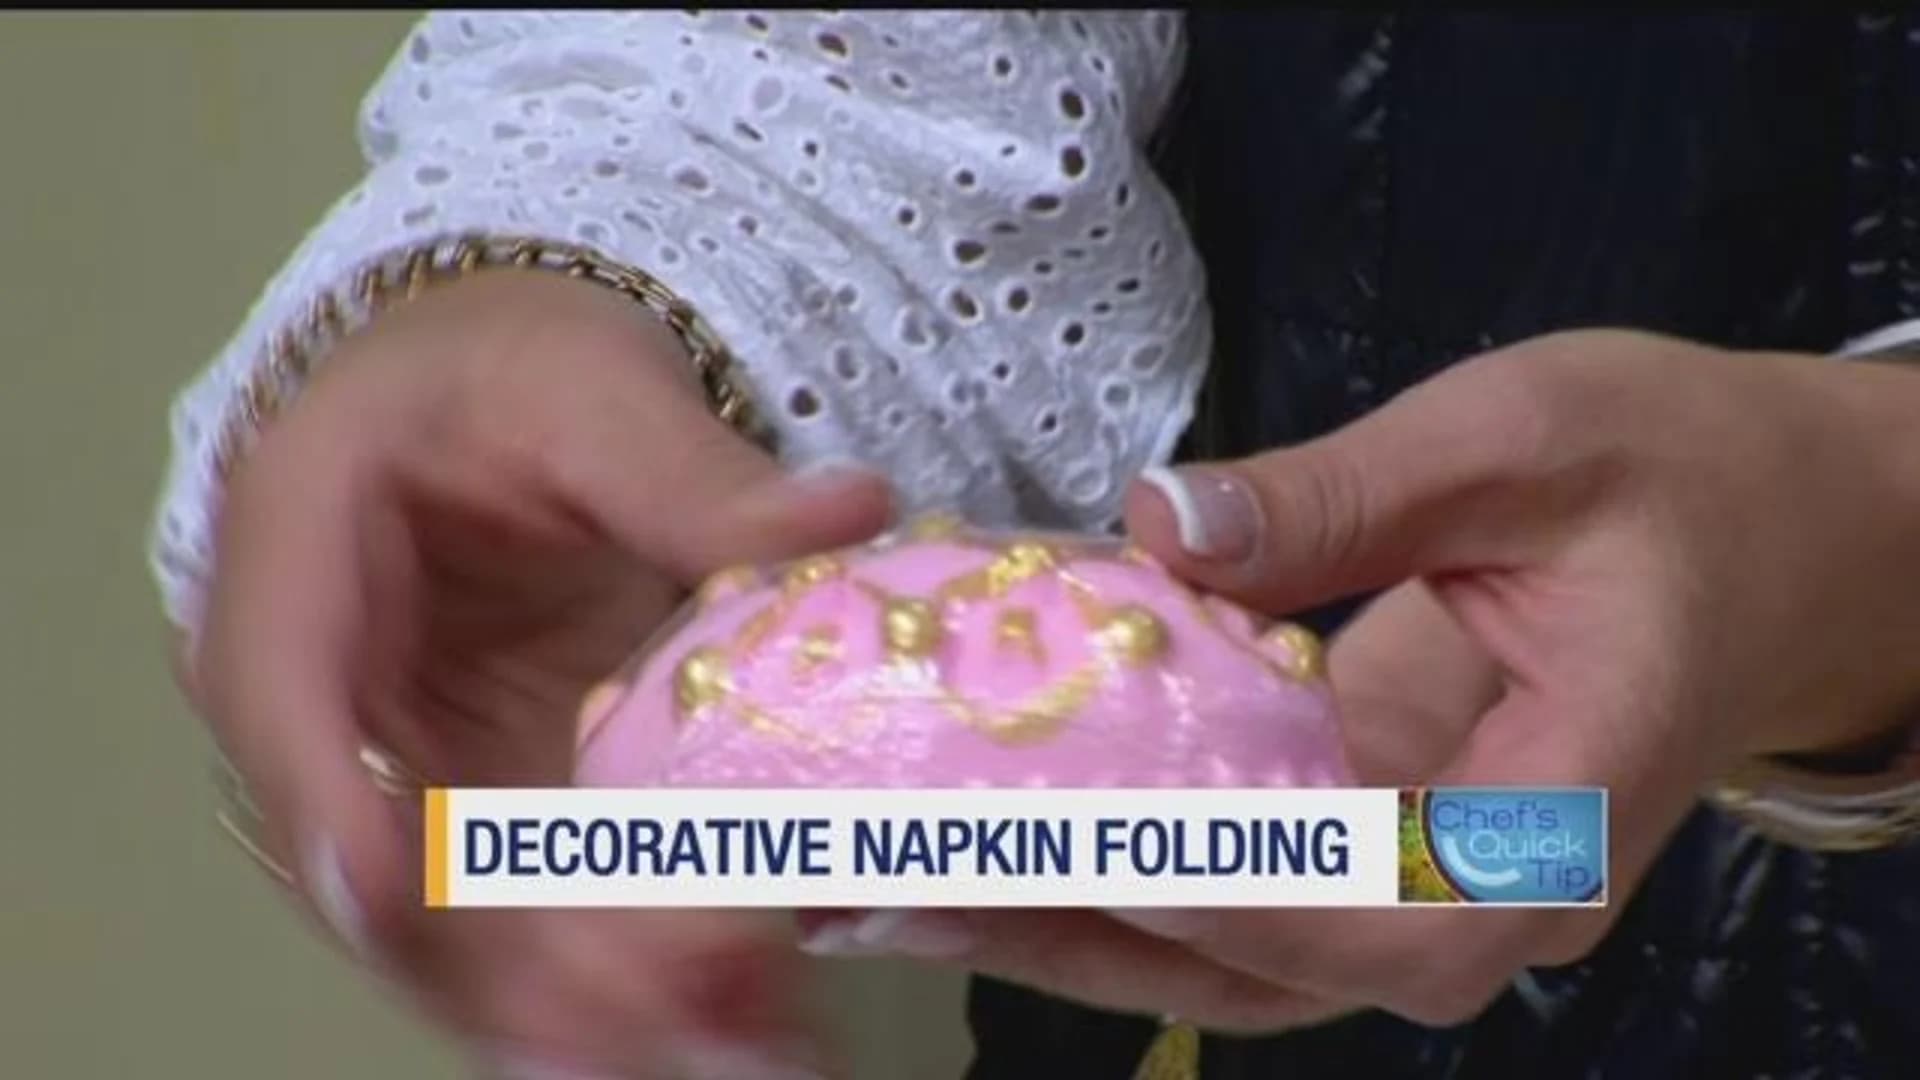 Chef's Quick Tips: Folding decorative Easter-themed napkins